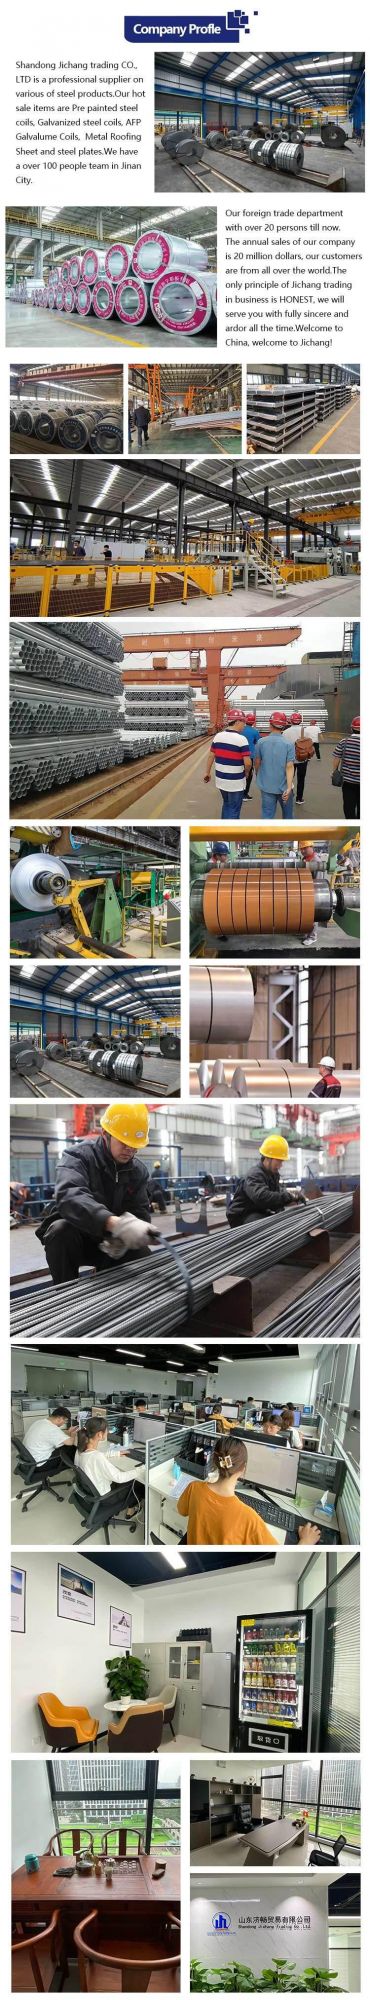 Hot Sell Cold Rolled Steel Sheet SPCC Material Specification Carbon Steel Coils Price